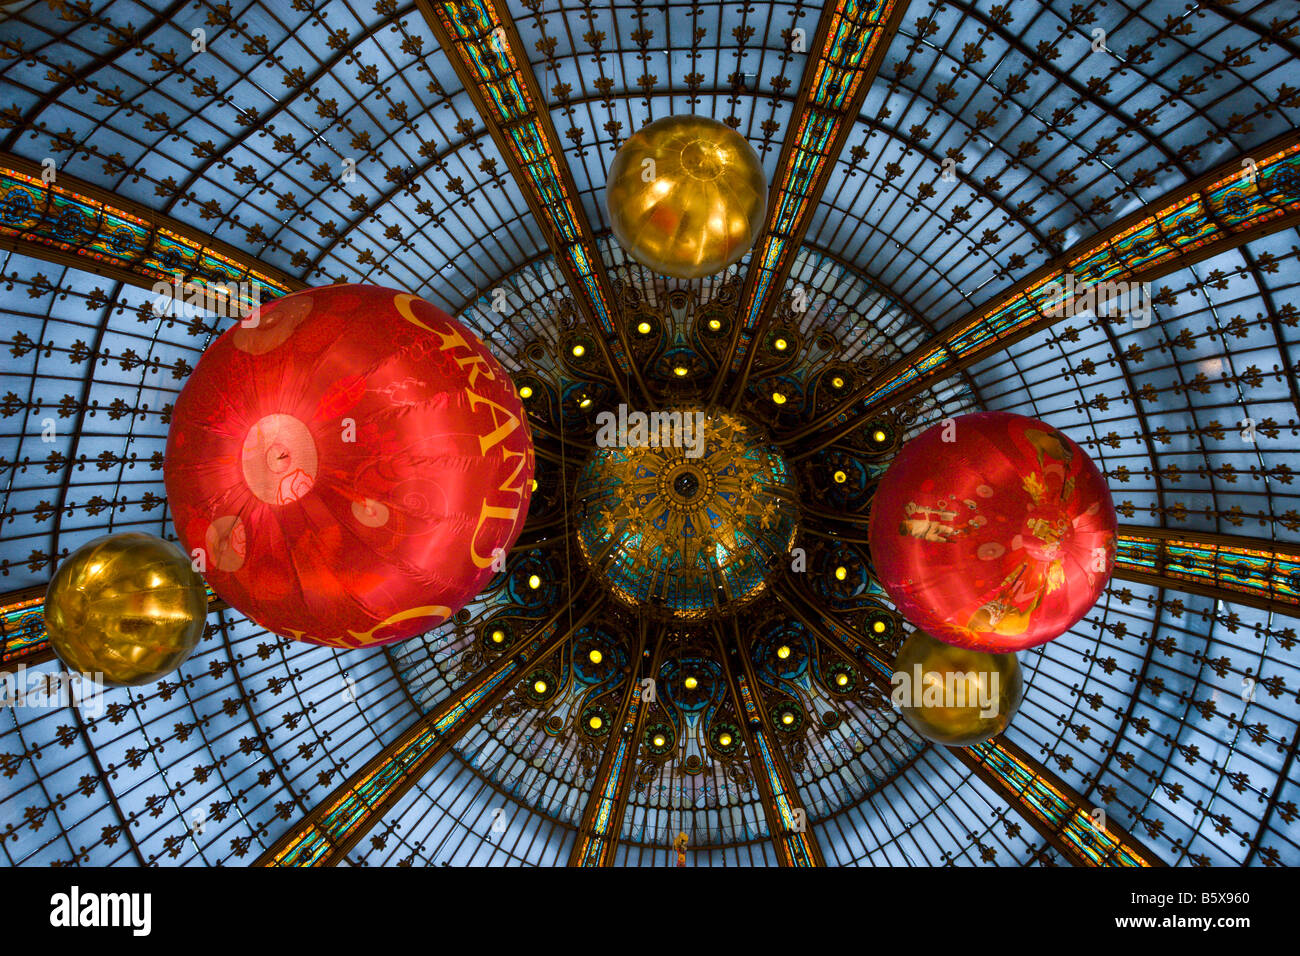 Department store Galeries Lafayette Paris France glass dome roof and Christmas decorations 2008 Stock Photo